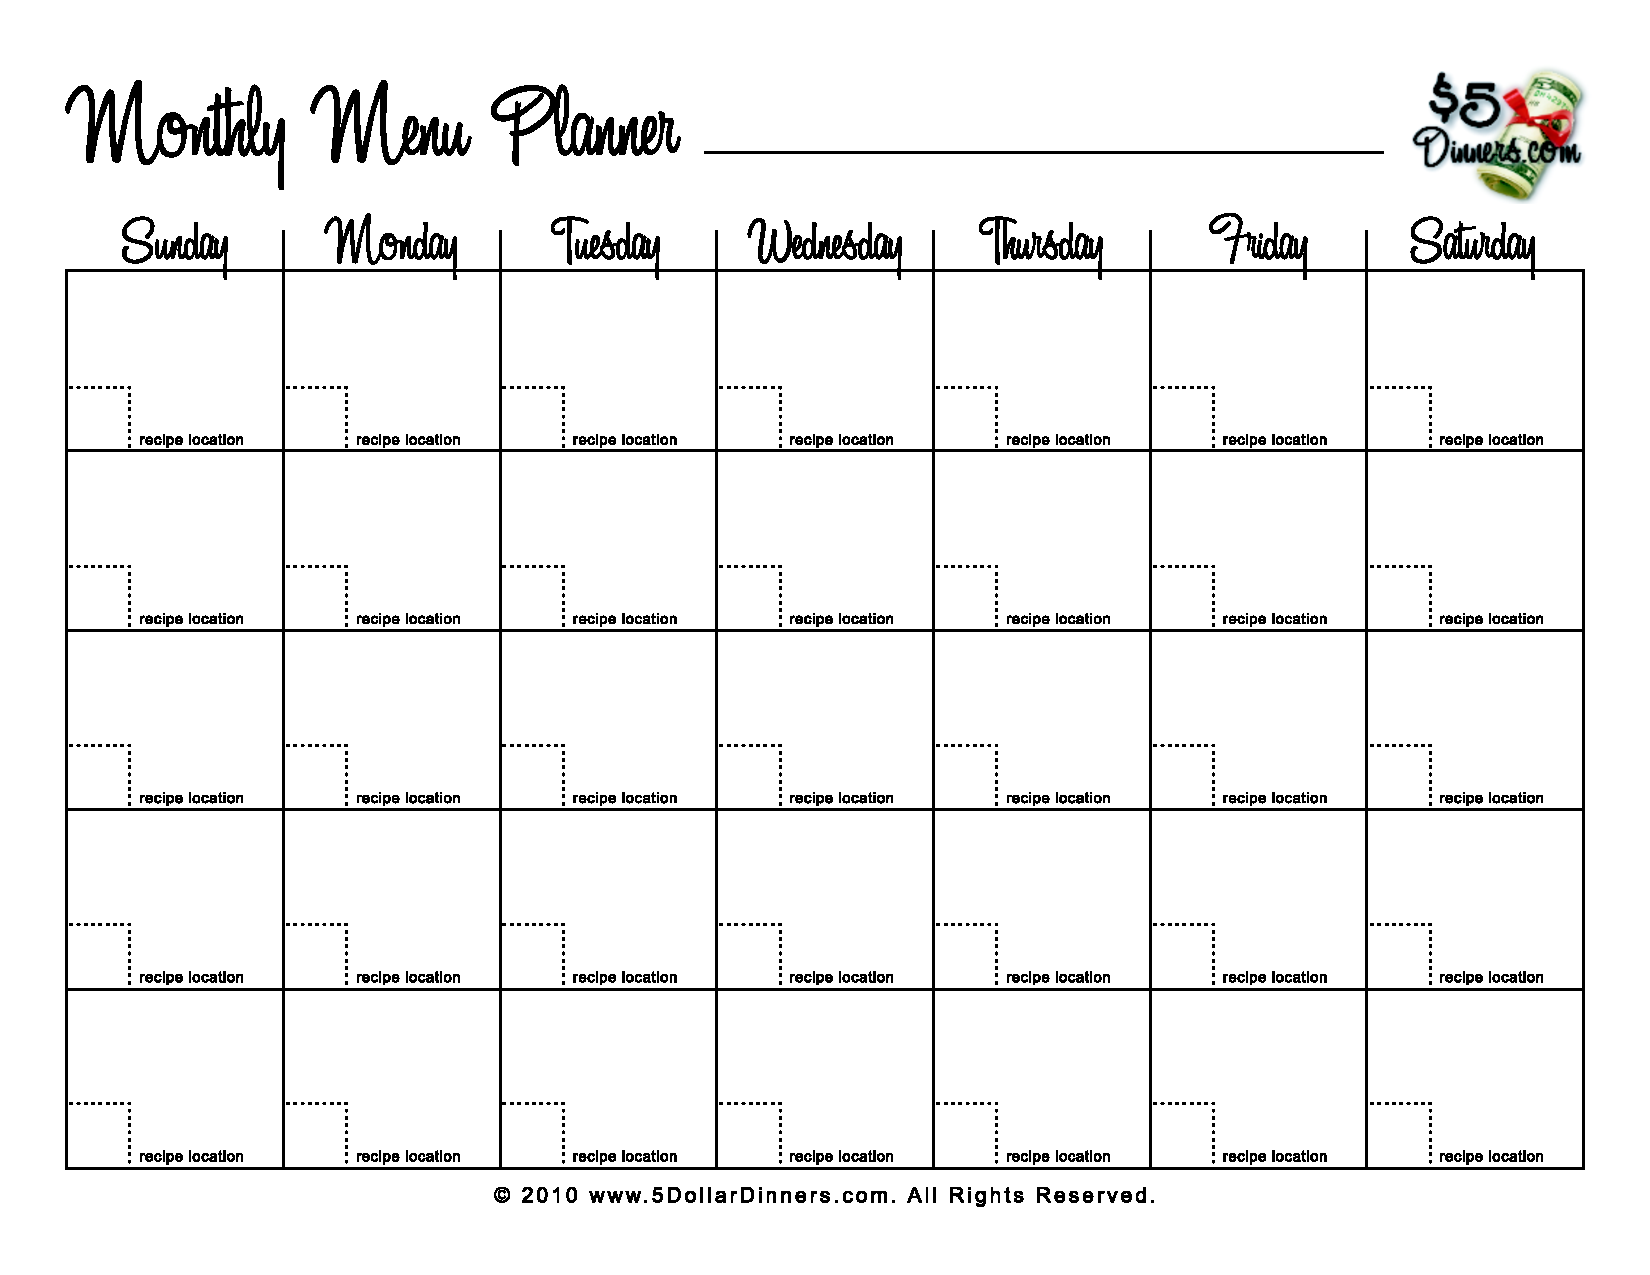 Monthly Menu Planner Template For Mac